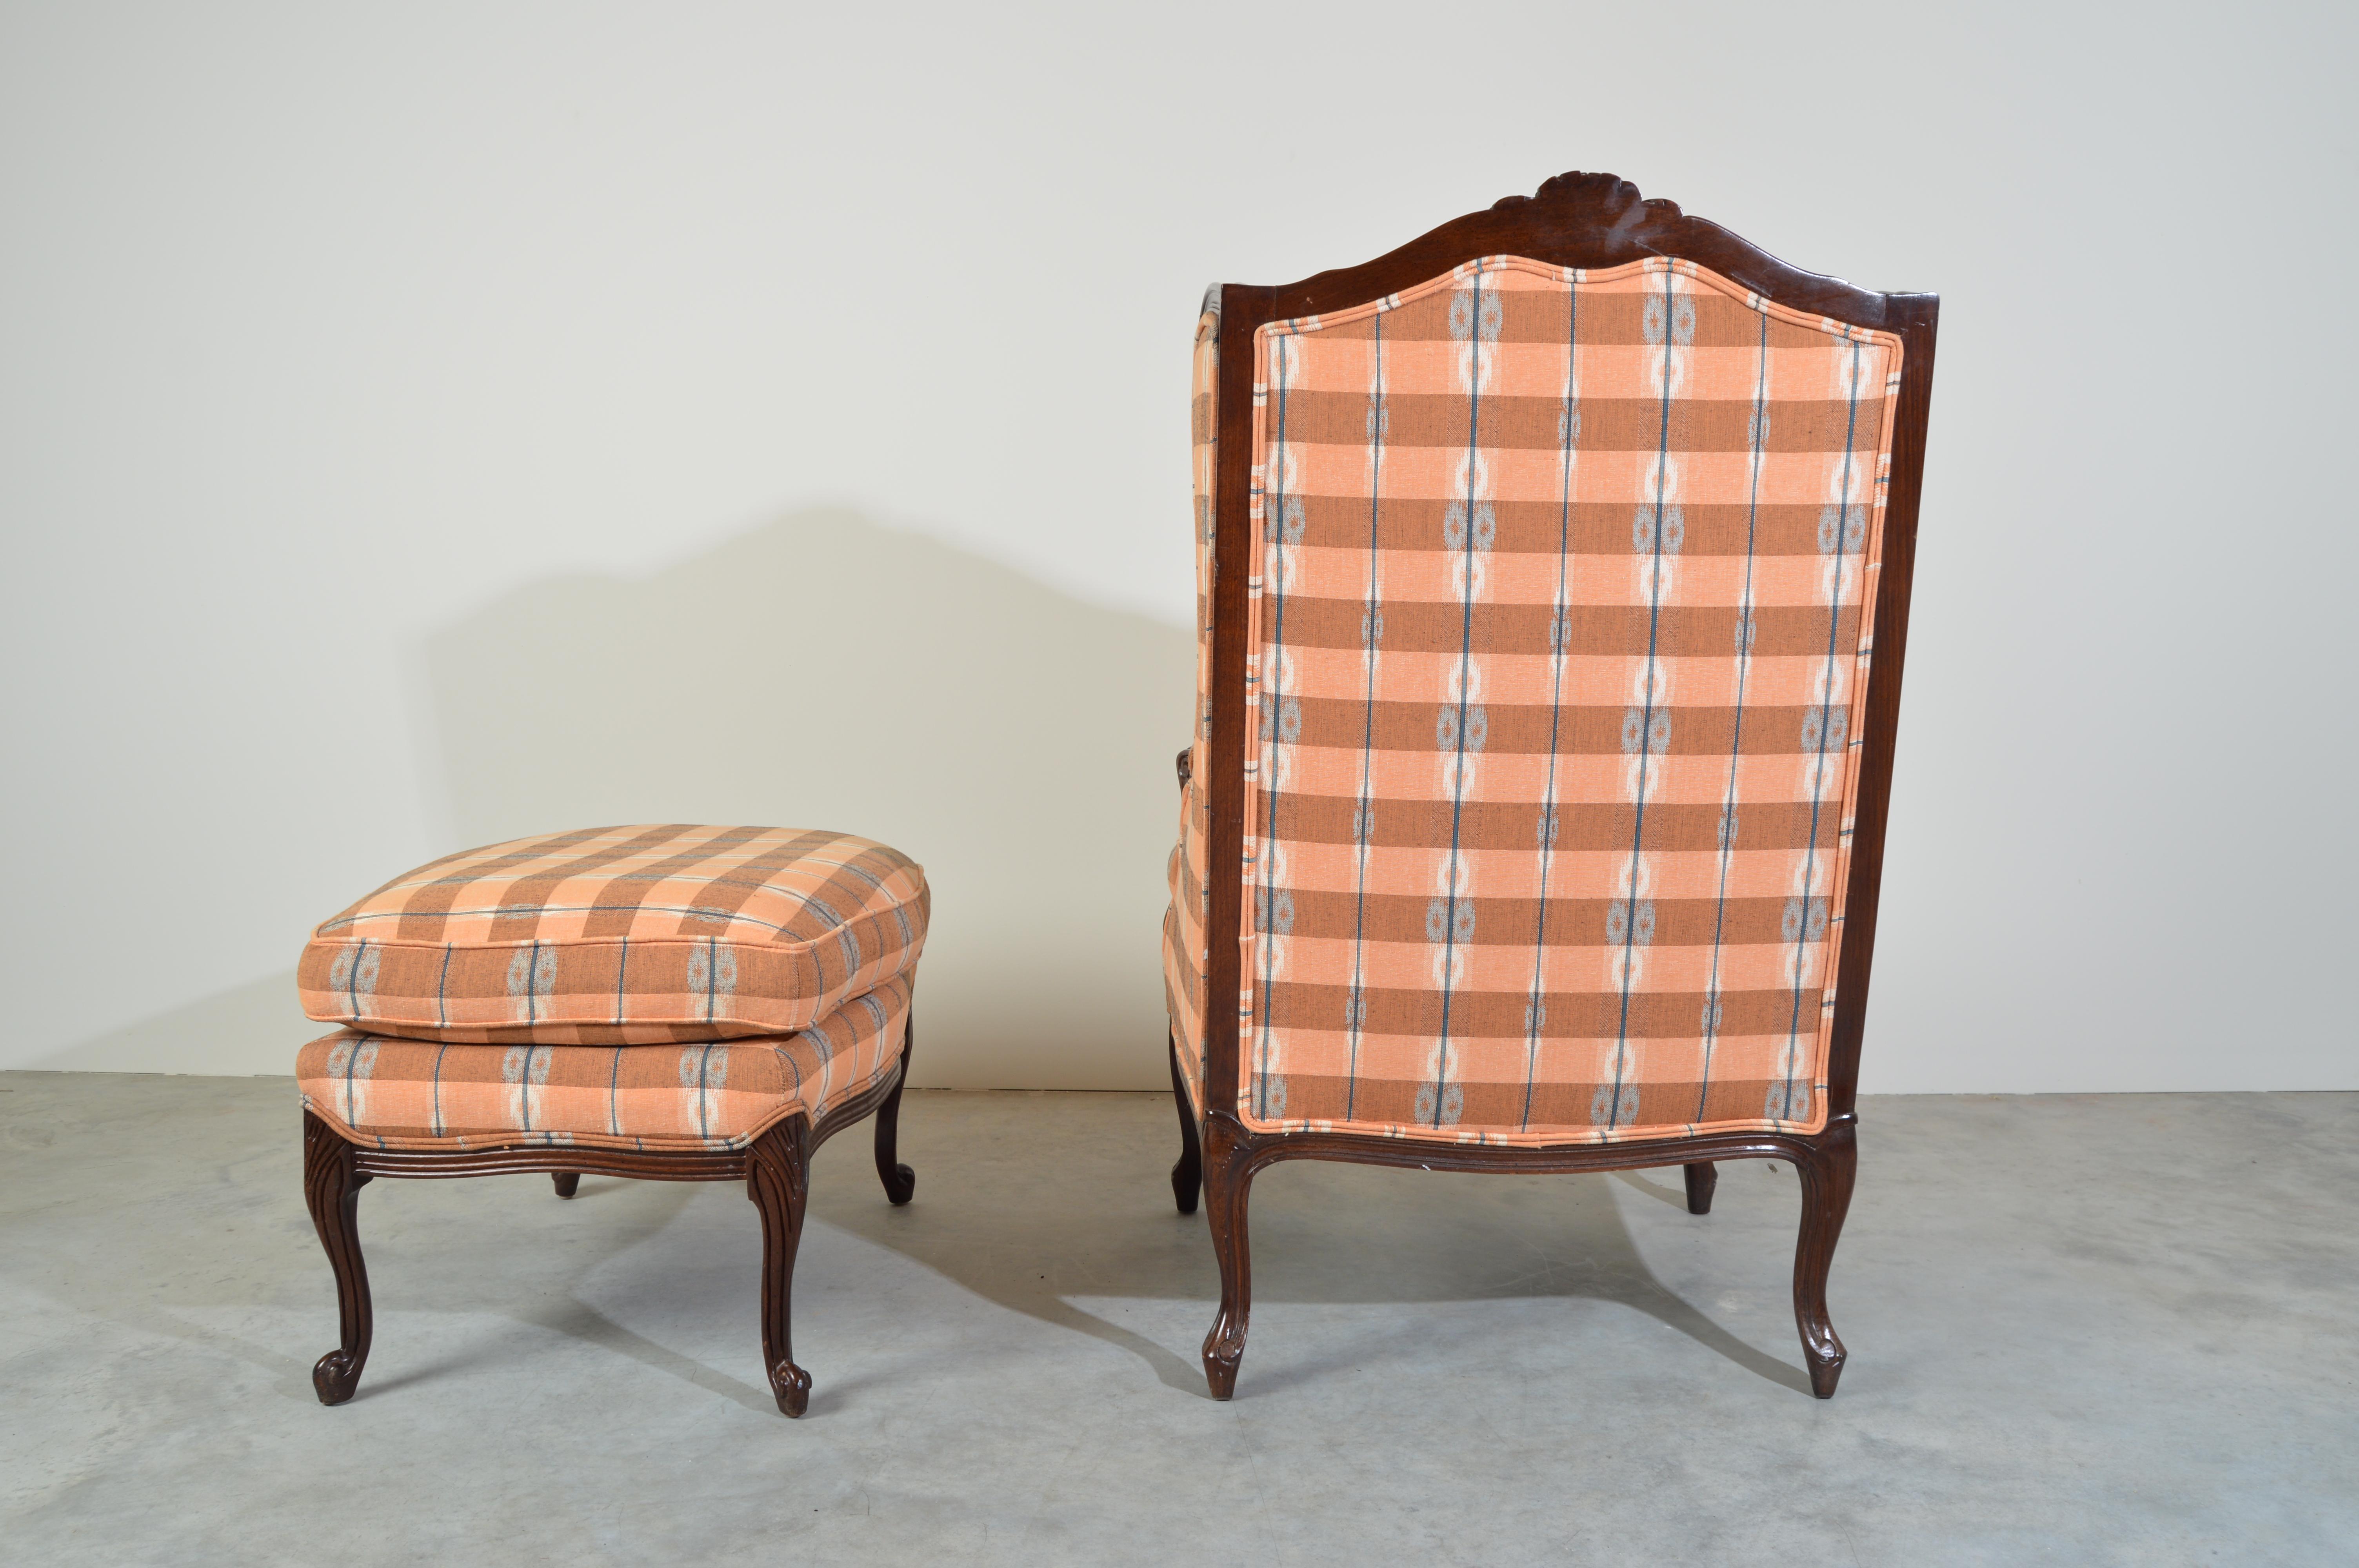 Carved Hickory Louis XV Style Walnut Wingback Chair & Ottoman Ikat Plaid Upholstery